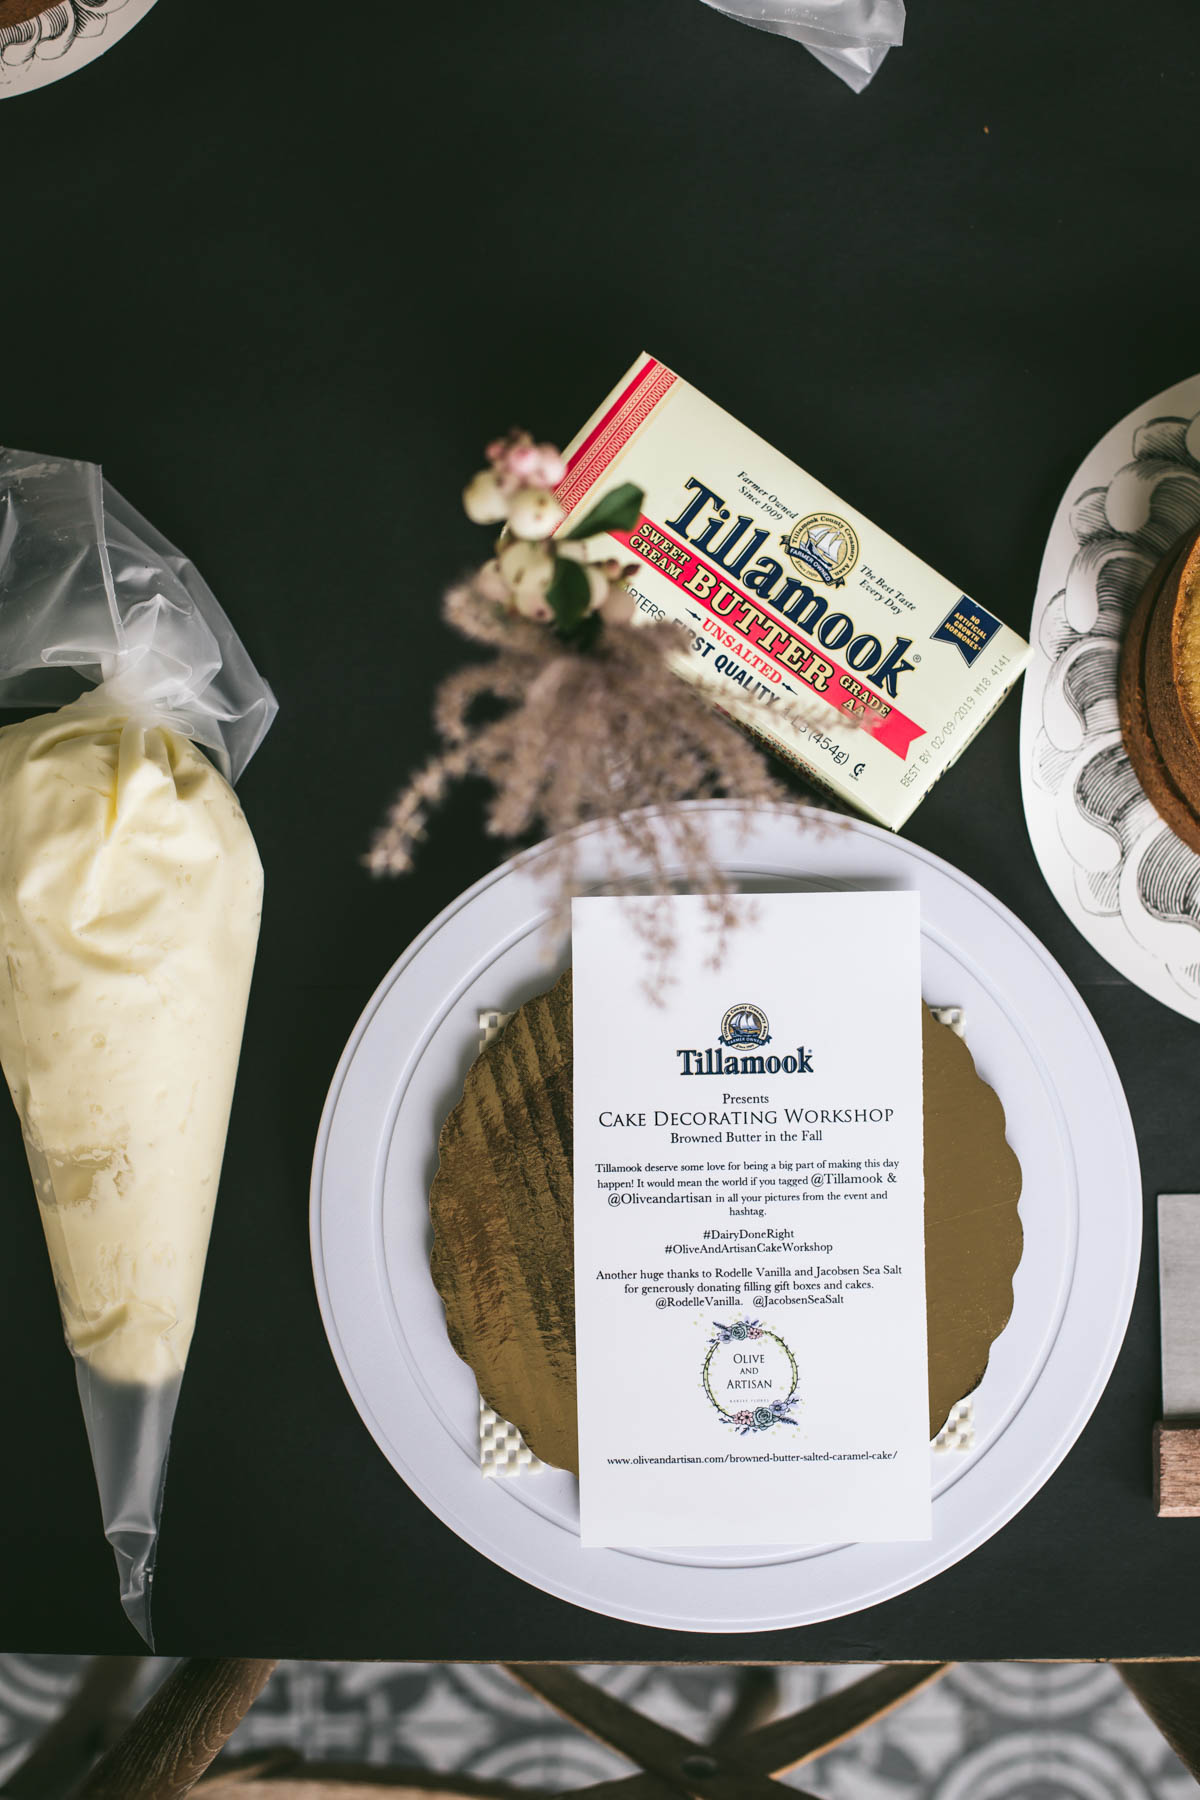 Olive and Artisan Cake Decorating Workshop: Tillamook Presents Browned Butter in the Fall.